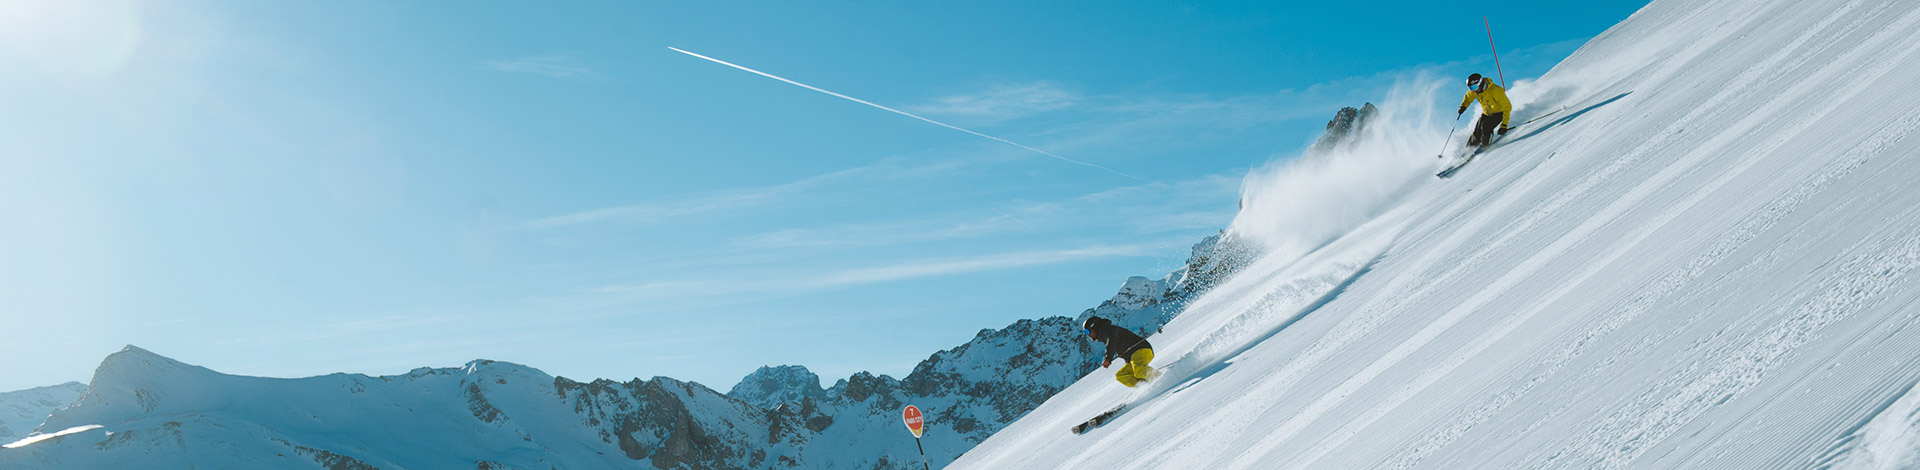 Enjoy skiing with your family or your friends on the largest ski area in the world !